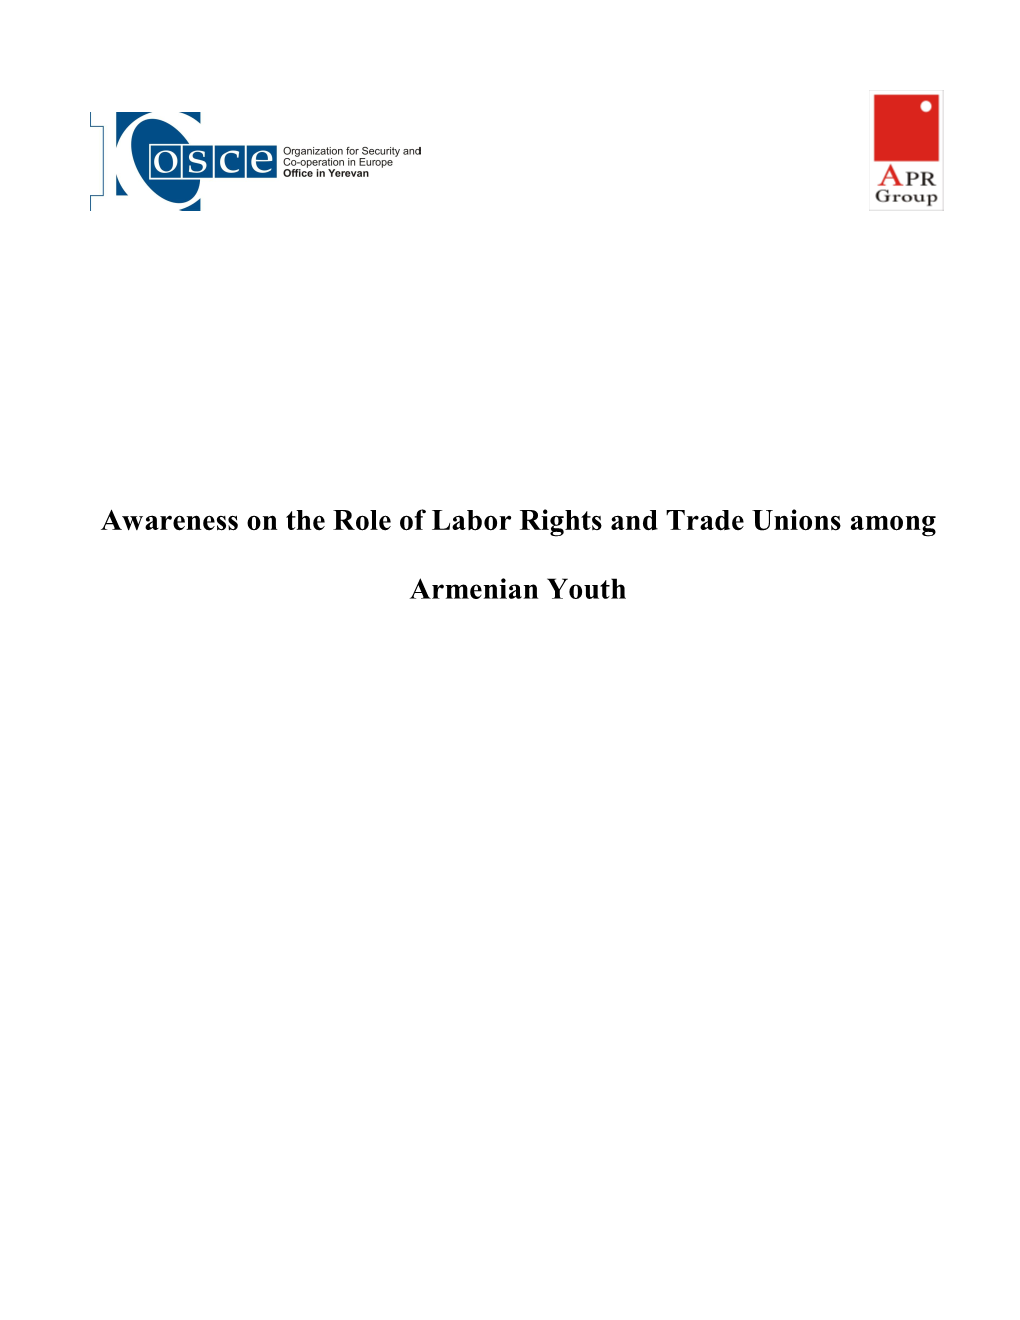 Awareness on the Role of Labor Rights and Trade Unions Among